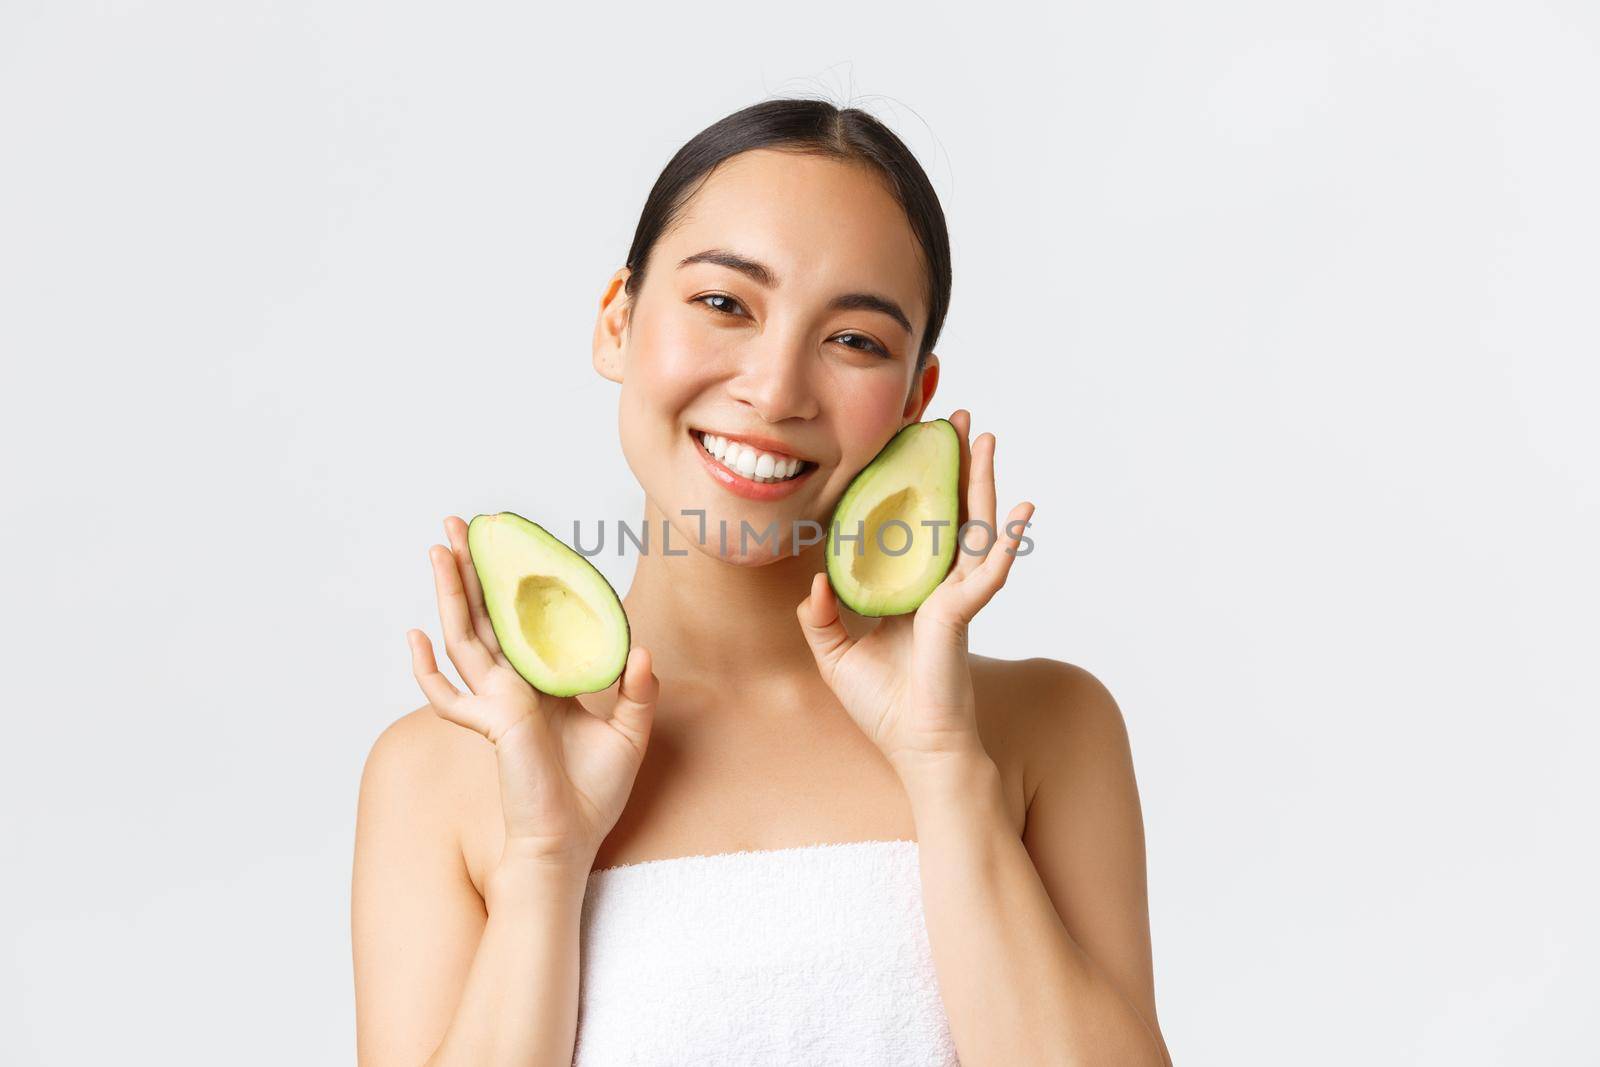 Beauty, personal care, spa and skincare concept. Tender cute asian female in bath towel showing avocado and smiling satisfied, nourish and treat skin with face masks or cream, white background.